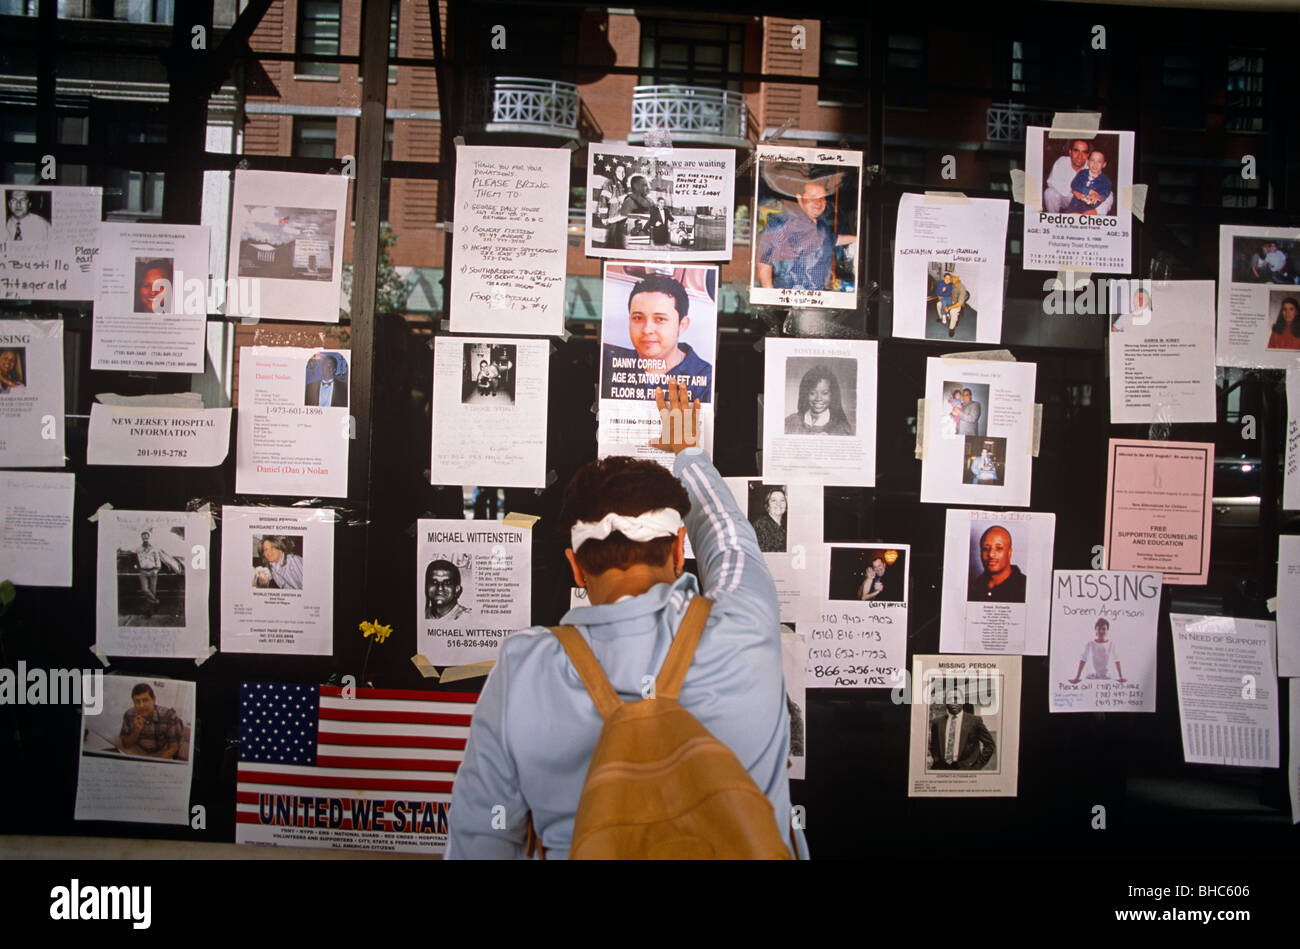 Relatives and friends remember the missing a week after the attacks on the twin towers on 9/11. Stock Photo